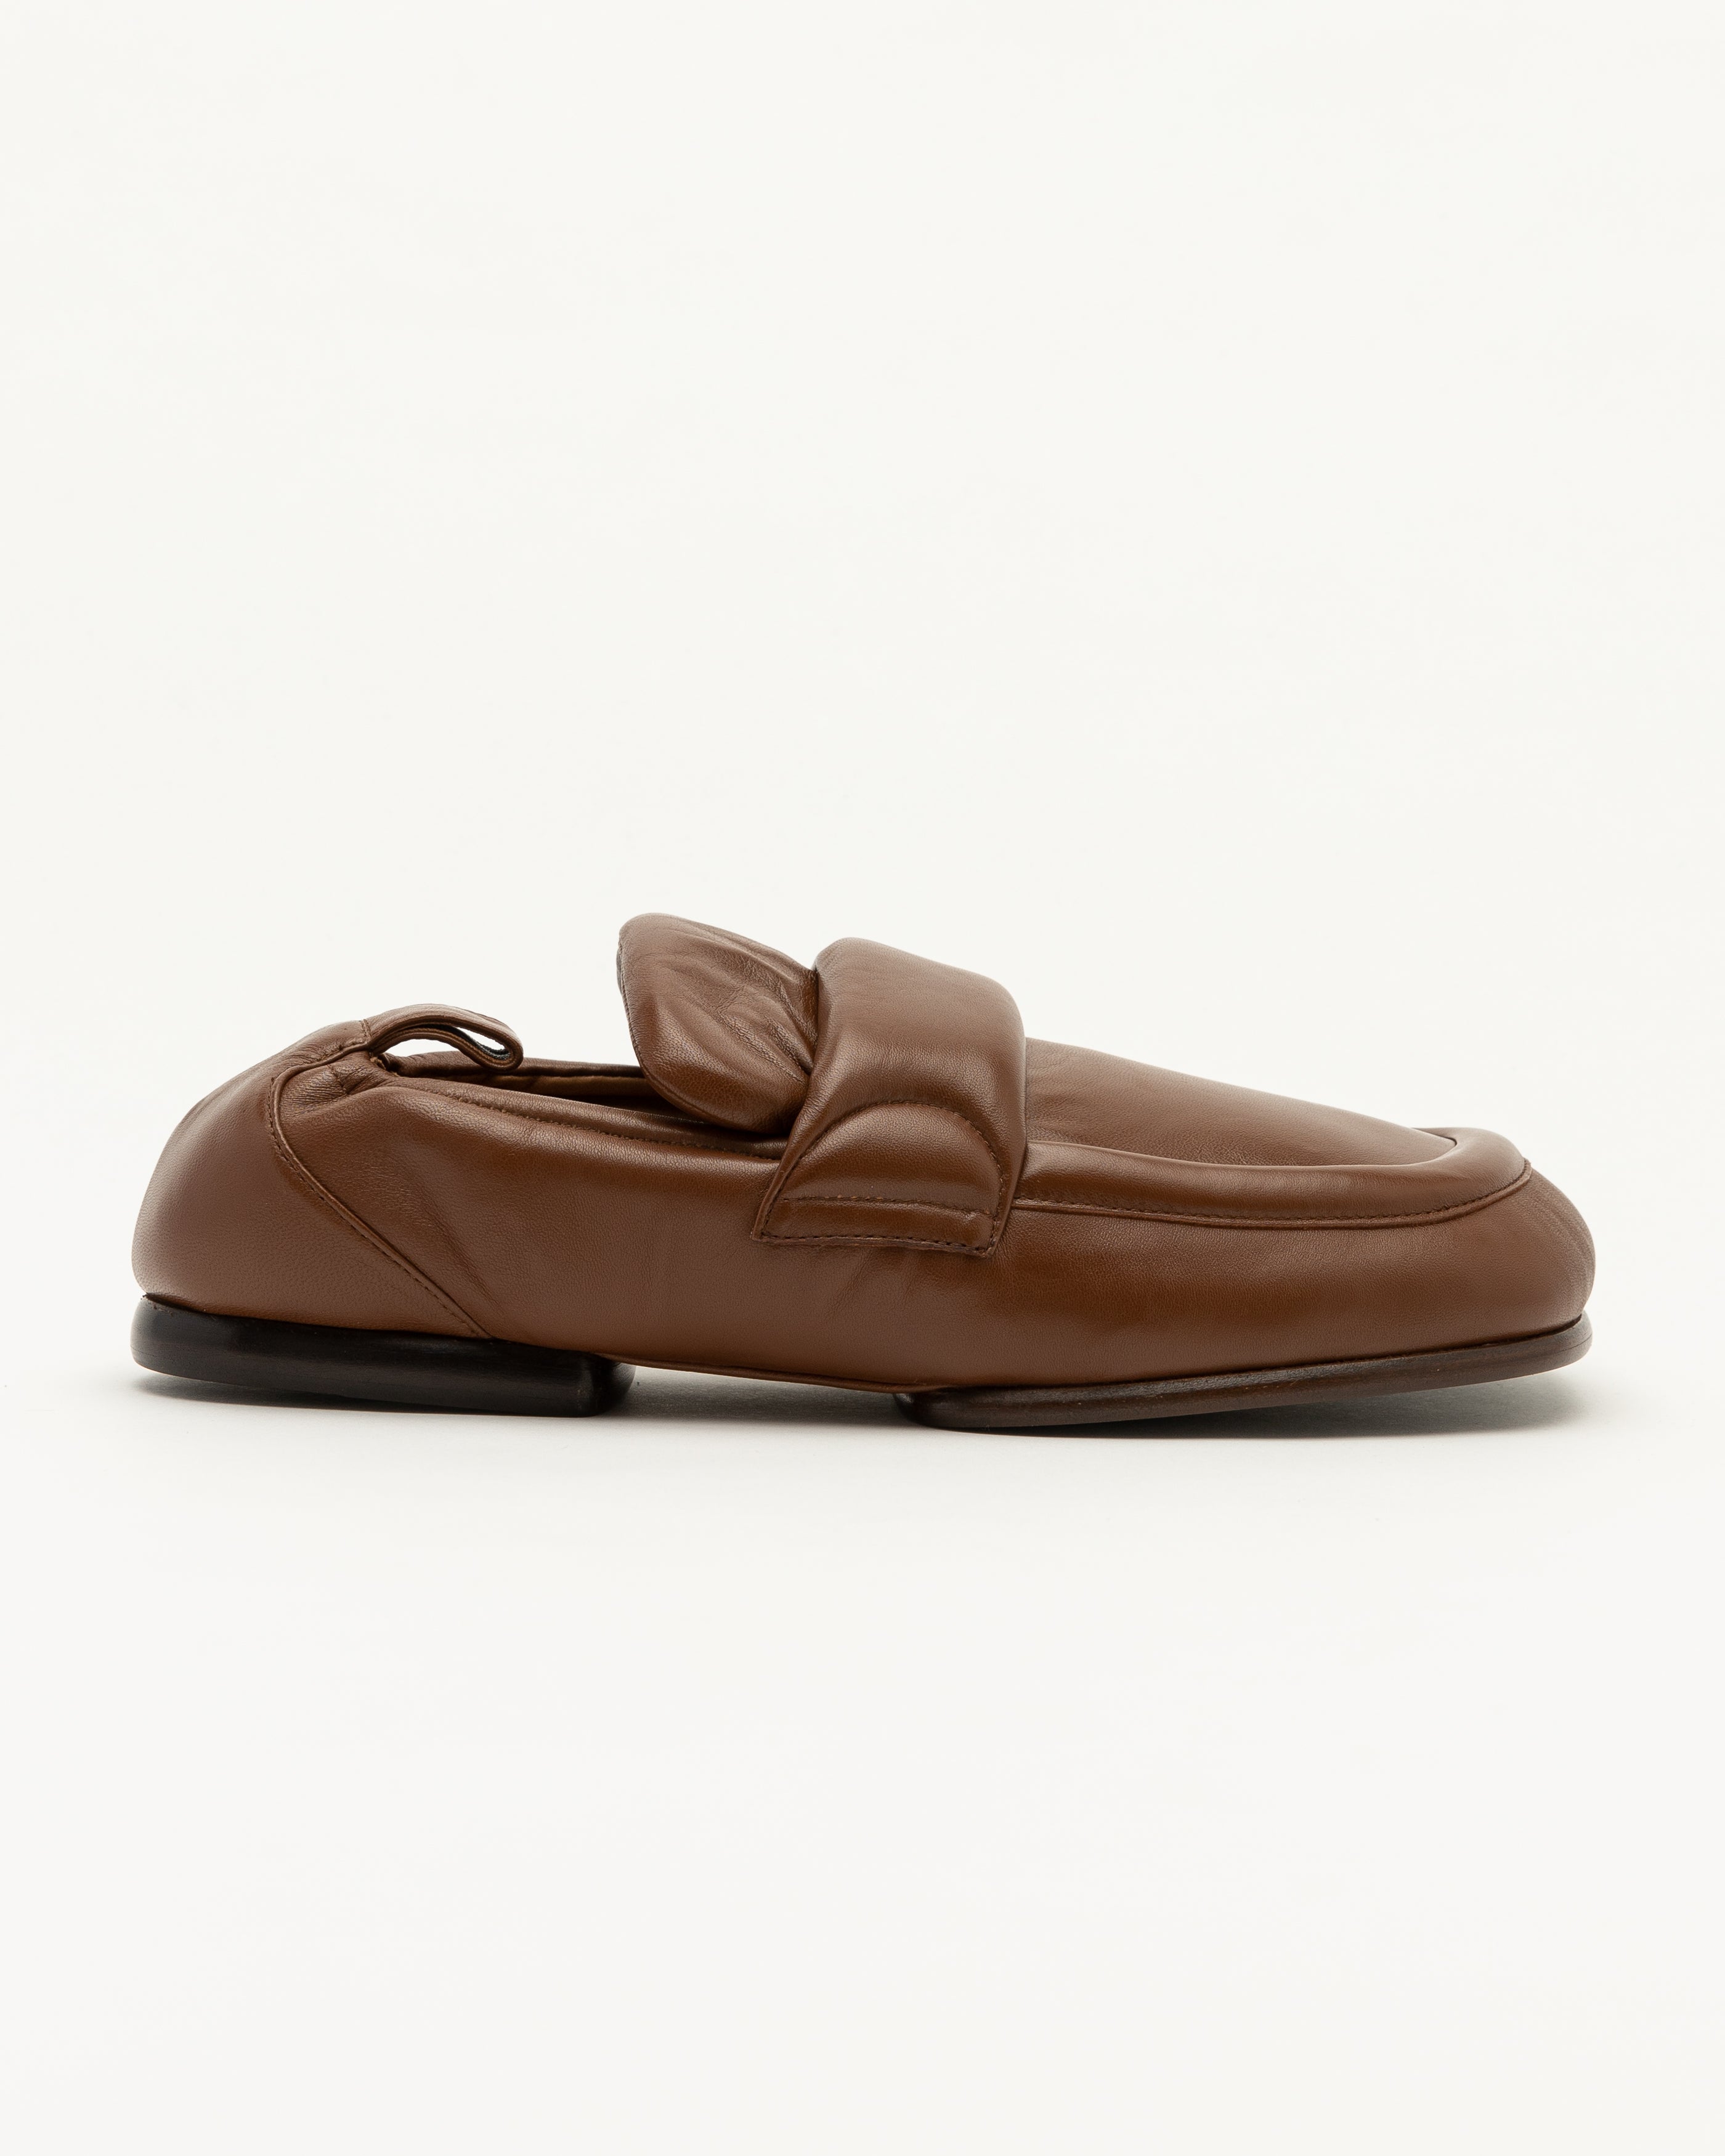 Padded Loafers in Tan